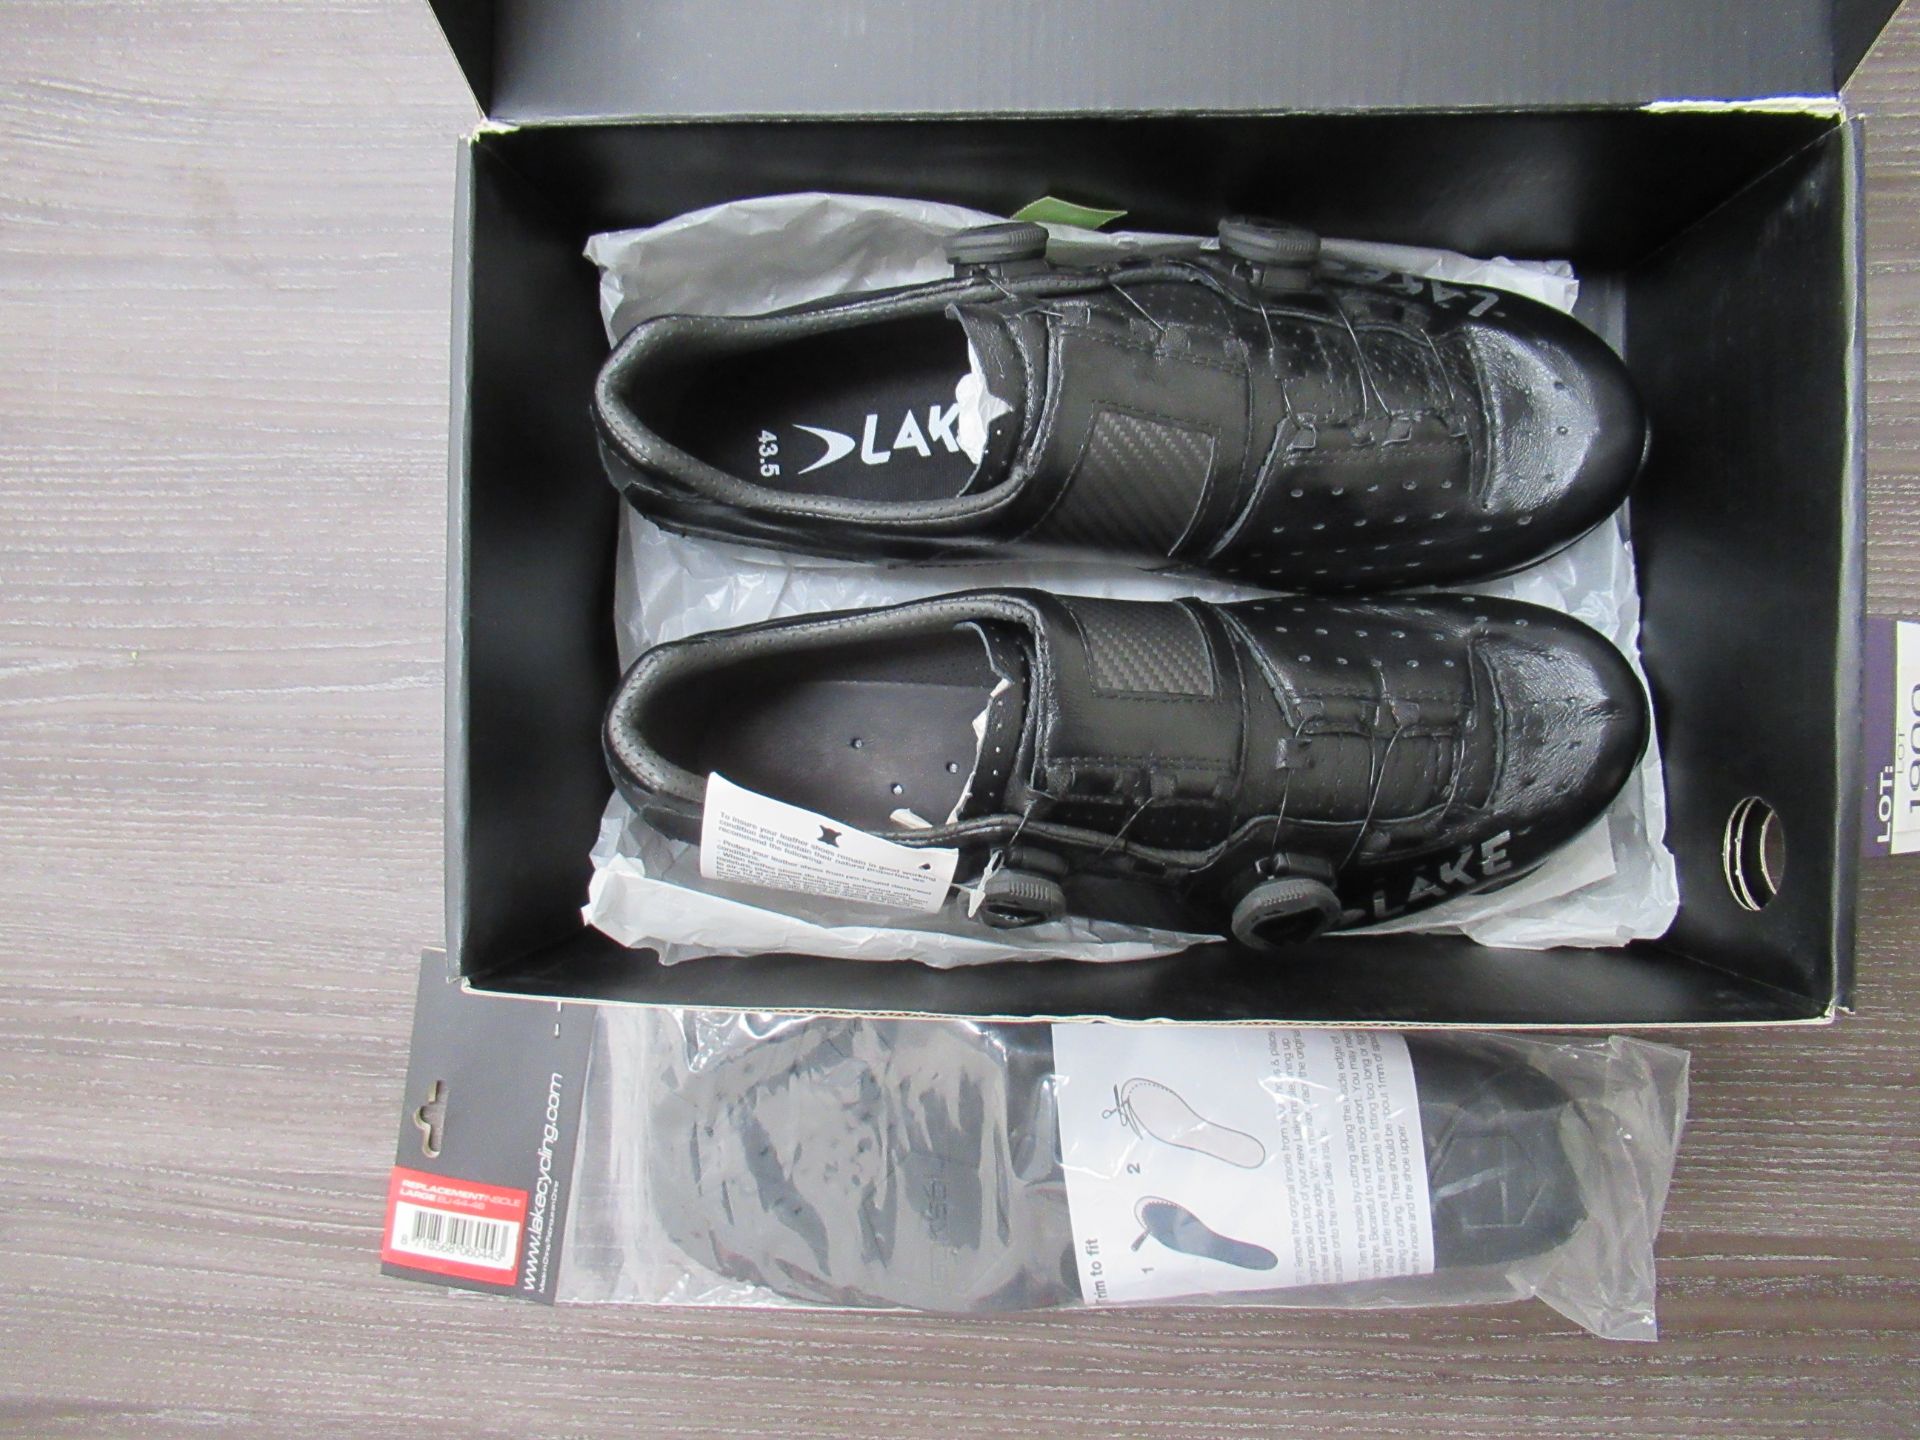 Pair of Lake CX403 cycling shoes (black/silver) - boxed EU size 43.5 (RRP£425) - Image 4 of 4